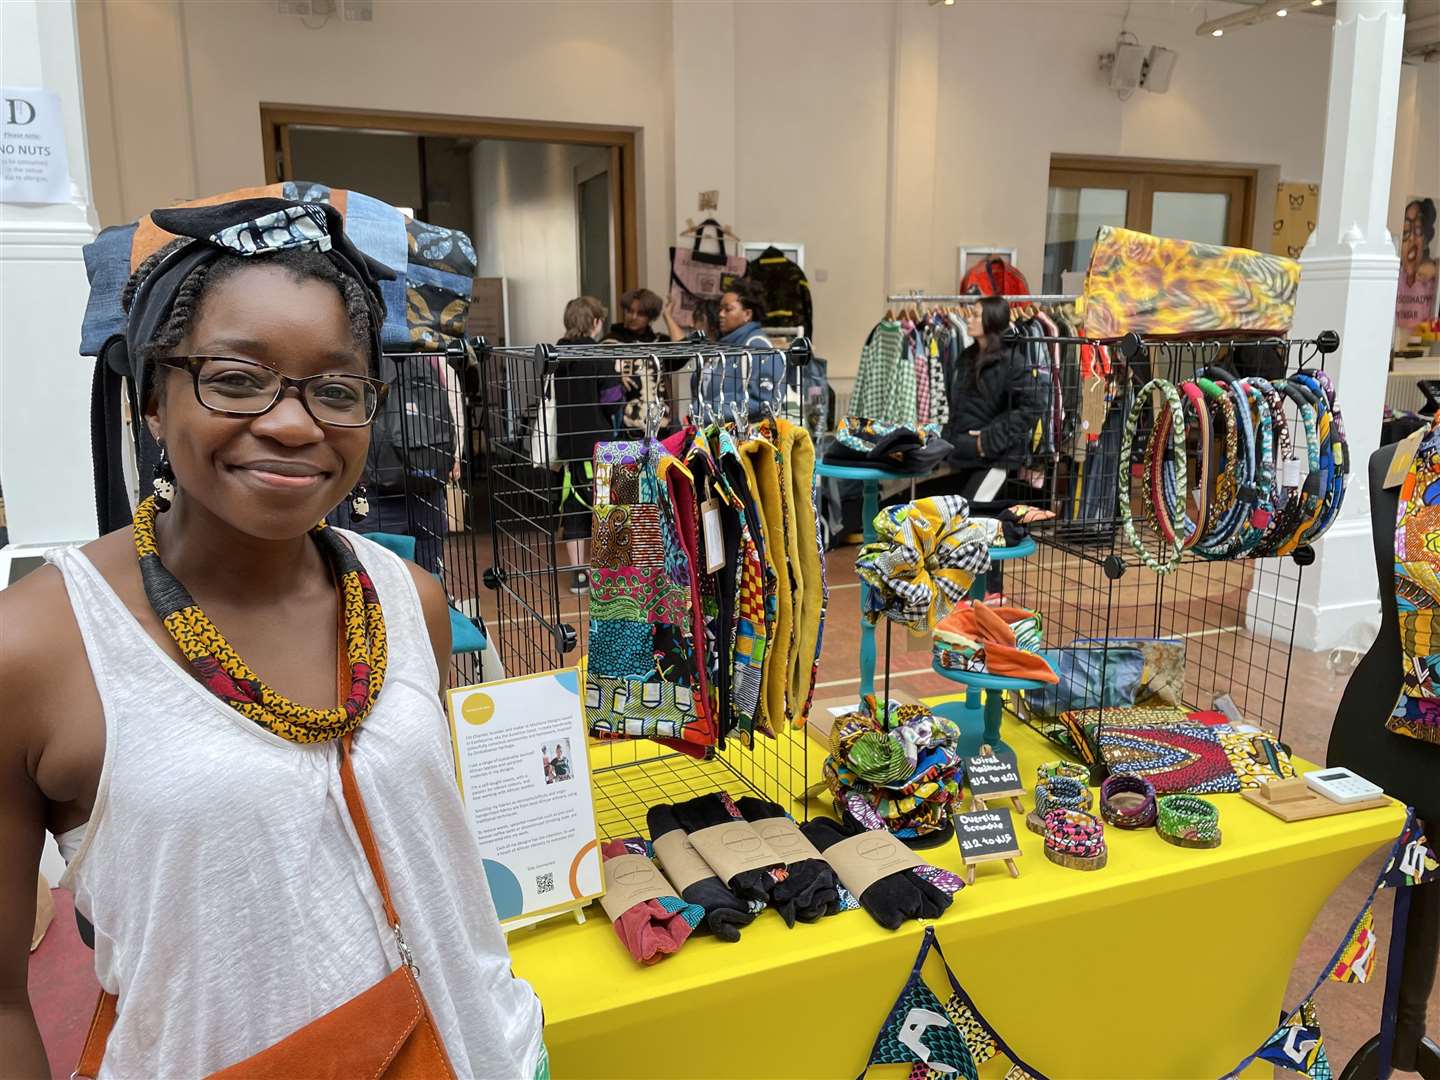 Chantel Hargreaves hosted a stall for her business Mashona designs, which uses offcuts of African textiles to make fashion accessories (PA)